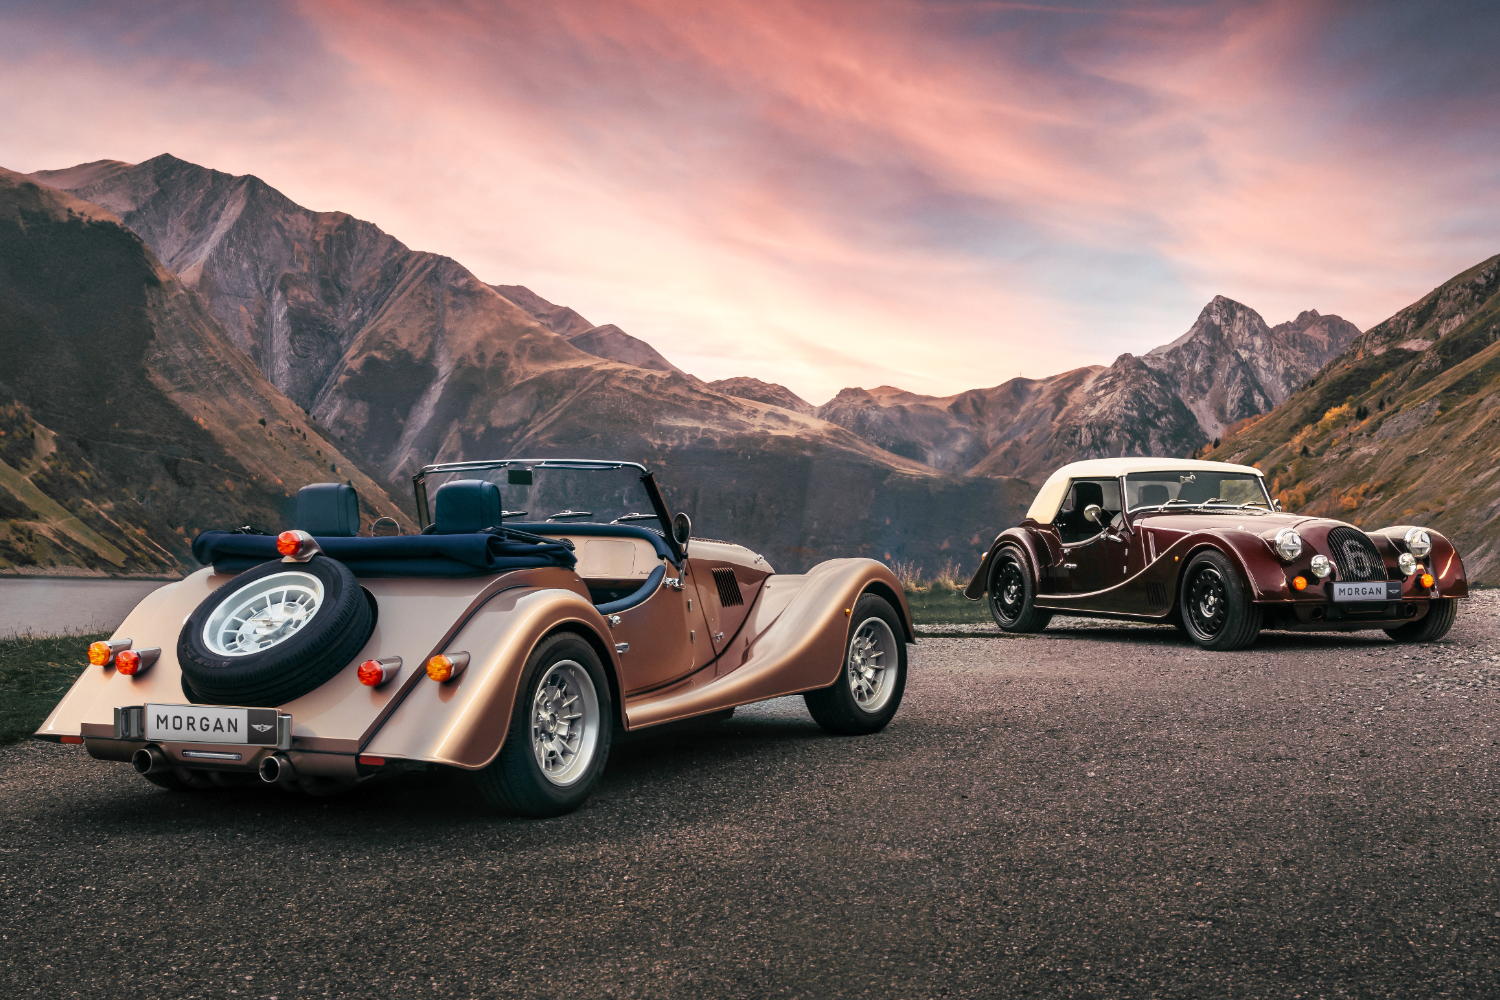 Morgan announces interior and mechanical changes for its 2023 models. Image by Morgan.